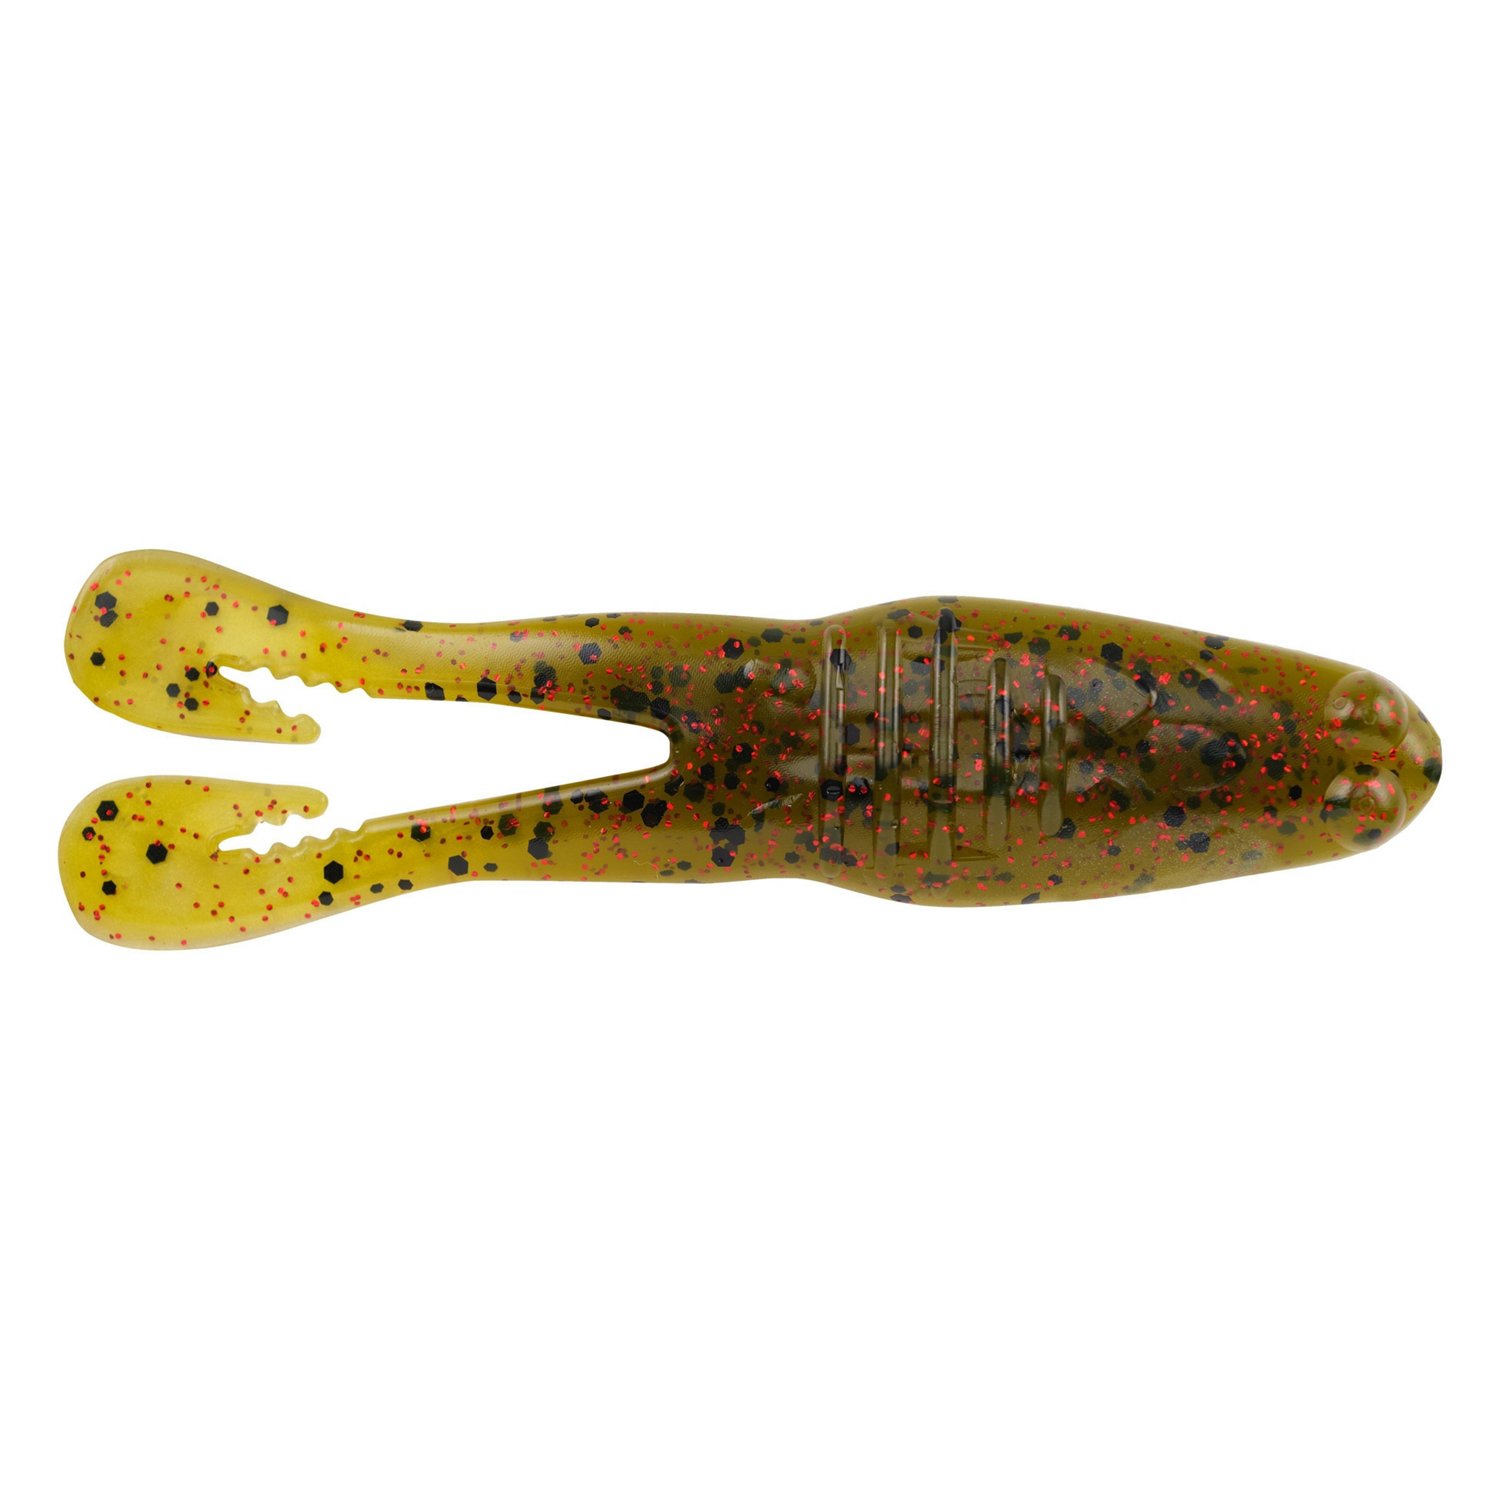 The perfect buzzbait trailer. A PowerBait Buzz'n Speed Toad has a sturdy  body for multiple fish per bait + fishing in heavy cover, with s